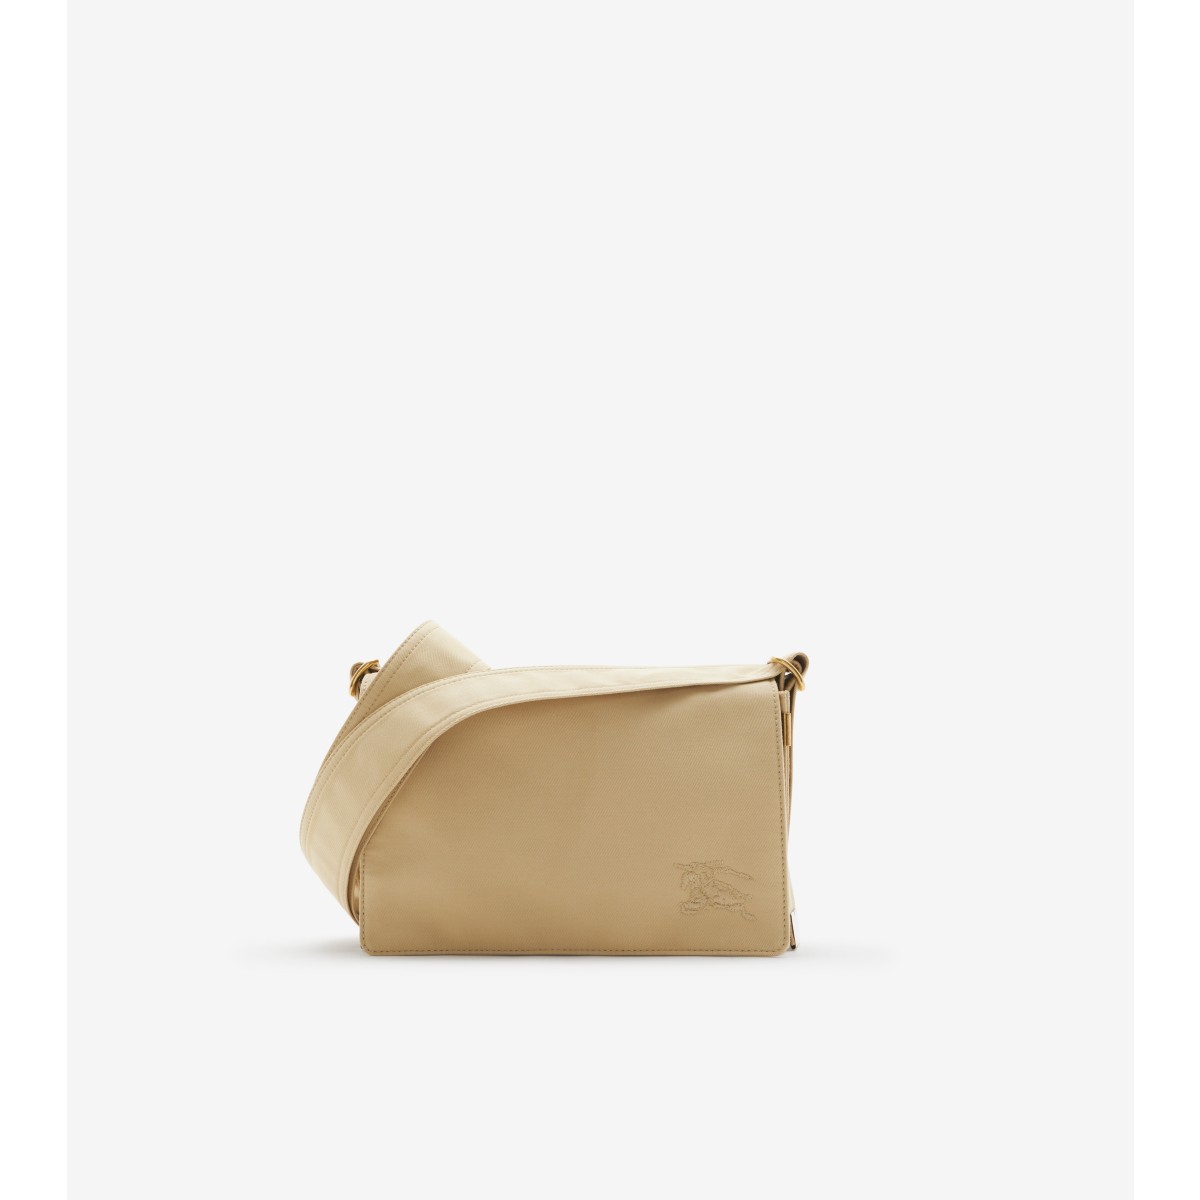 Burberry Trench Crossbody Bag In Flax